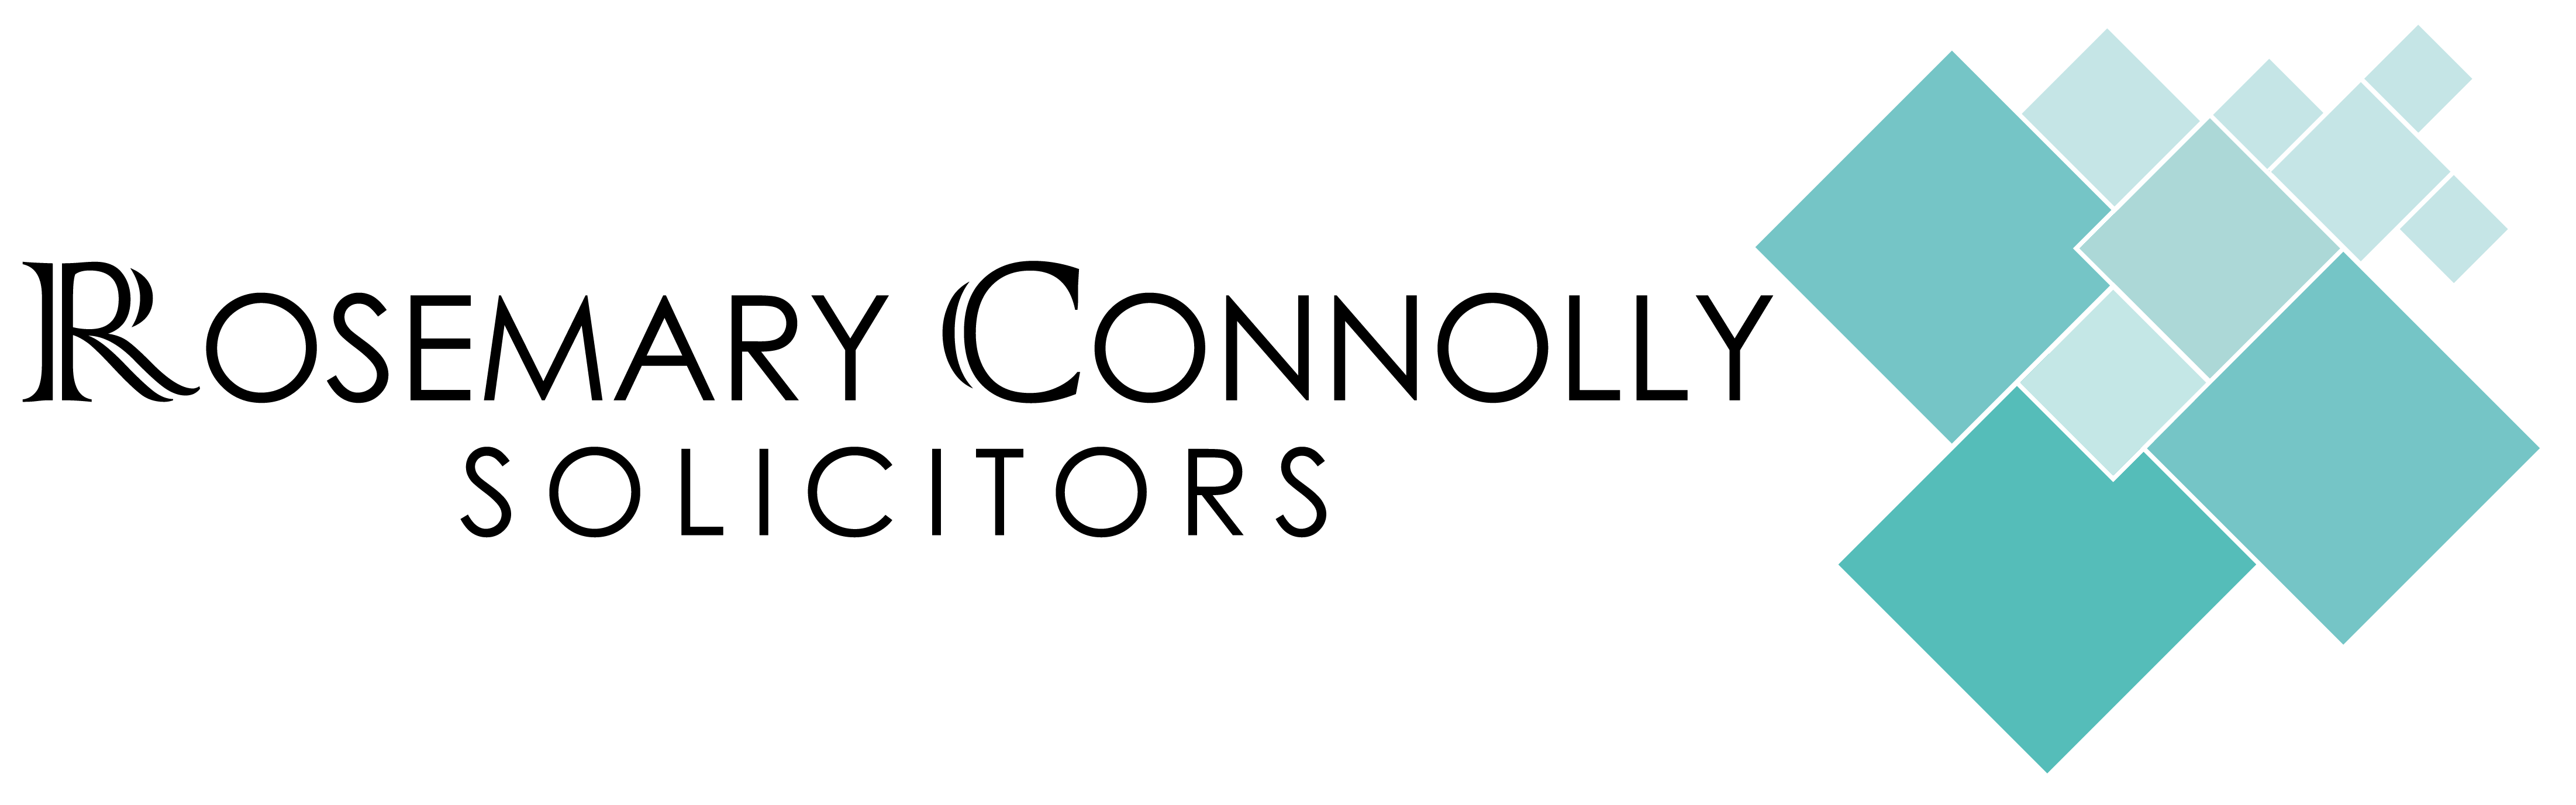 Rosemary Connolly Solicitors Logo